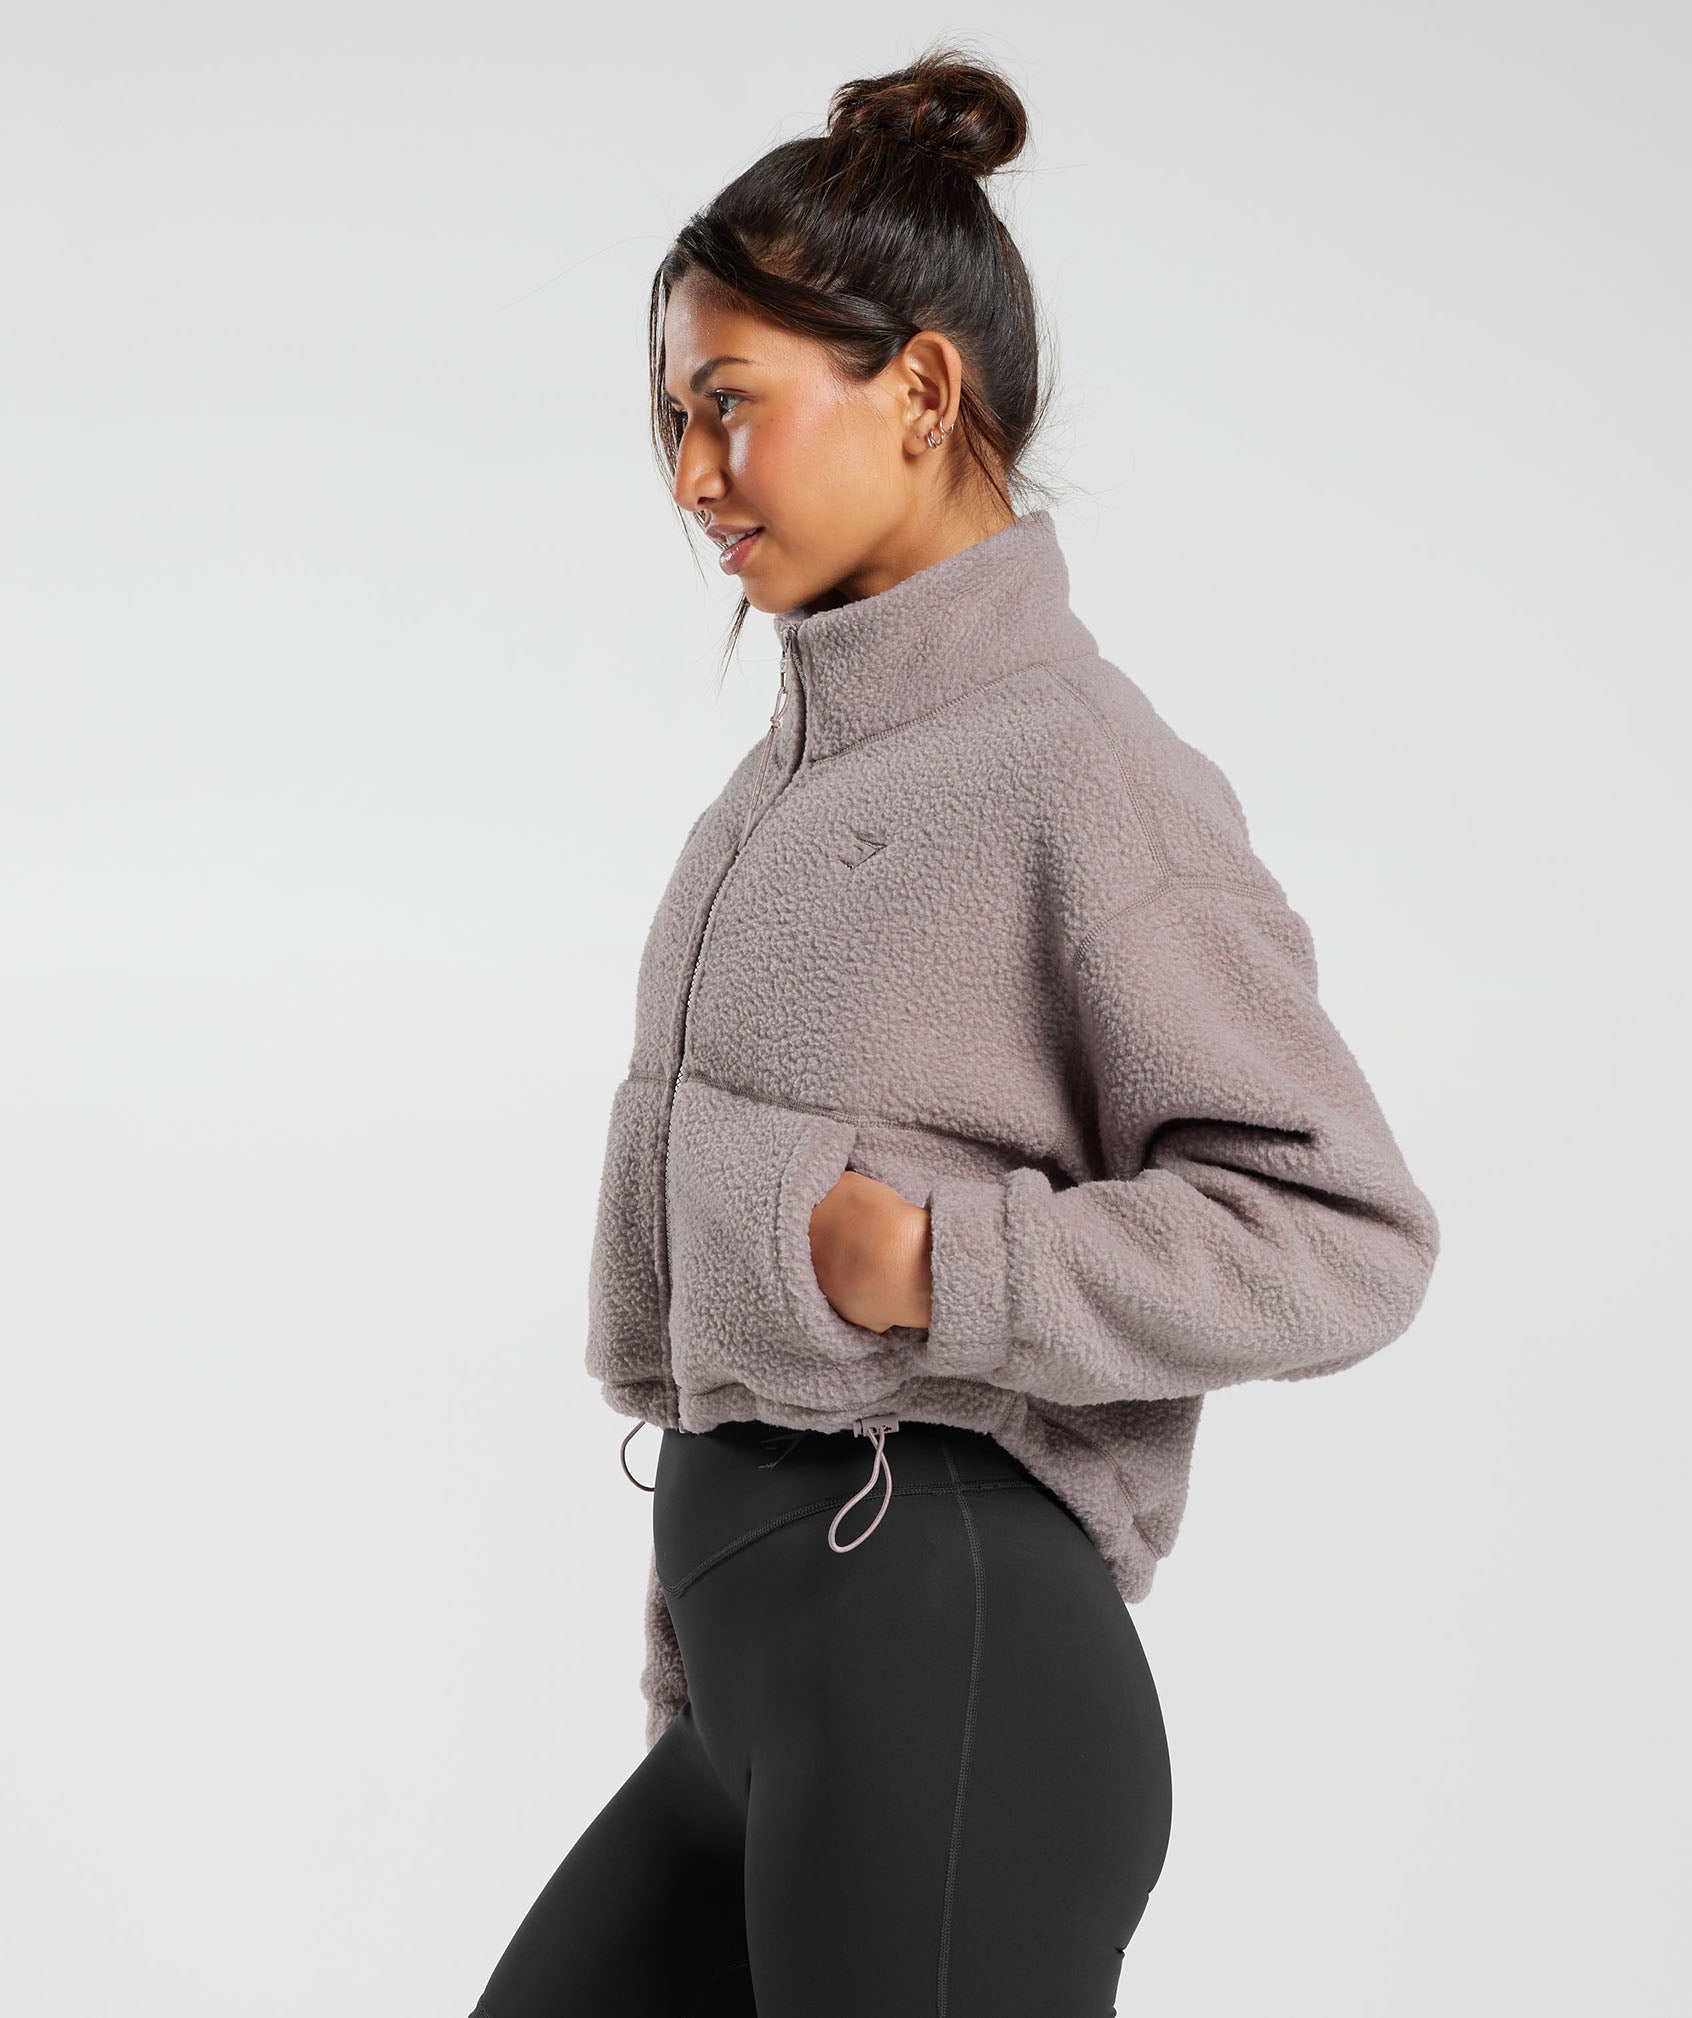 Elevate Fleece Midi Jacket in Washed Mauve - view 5